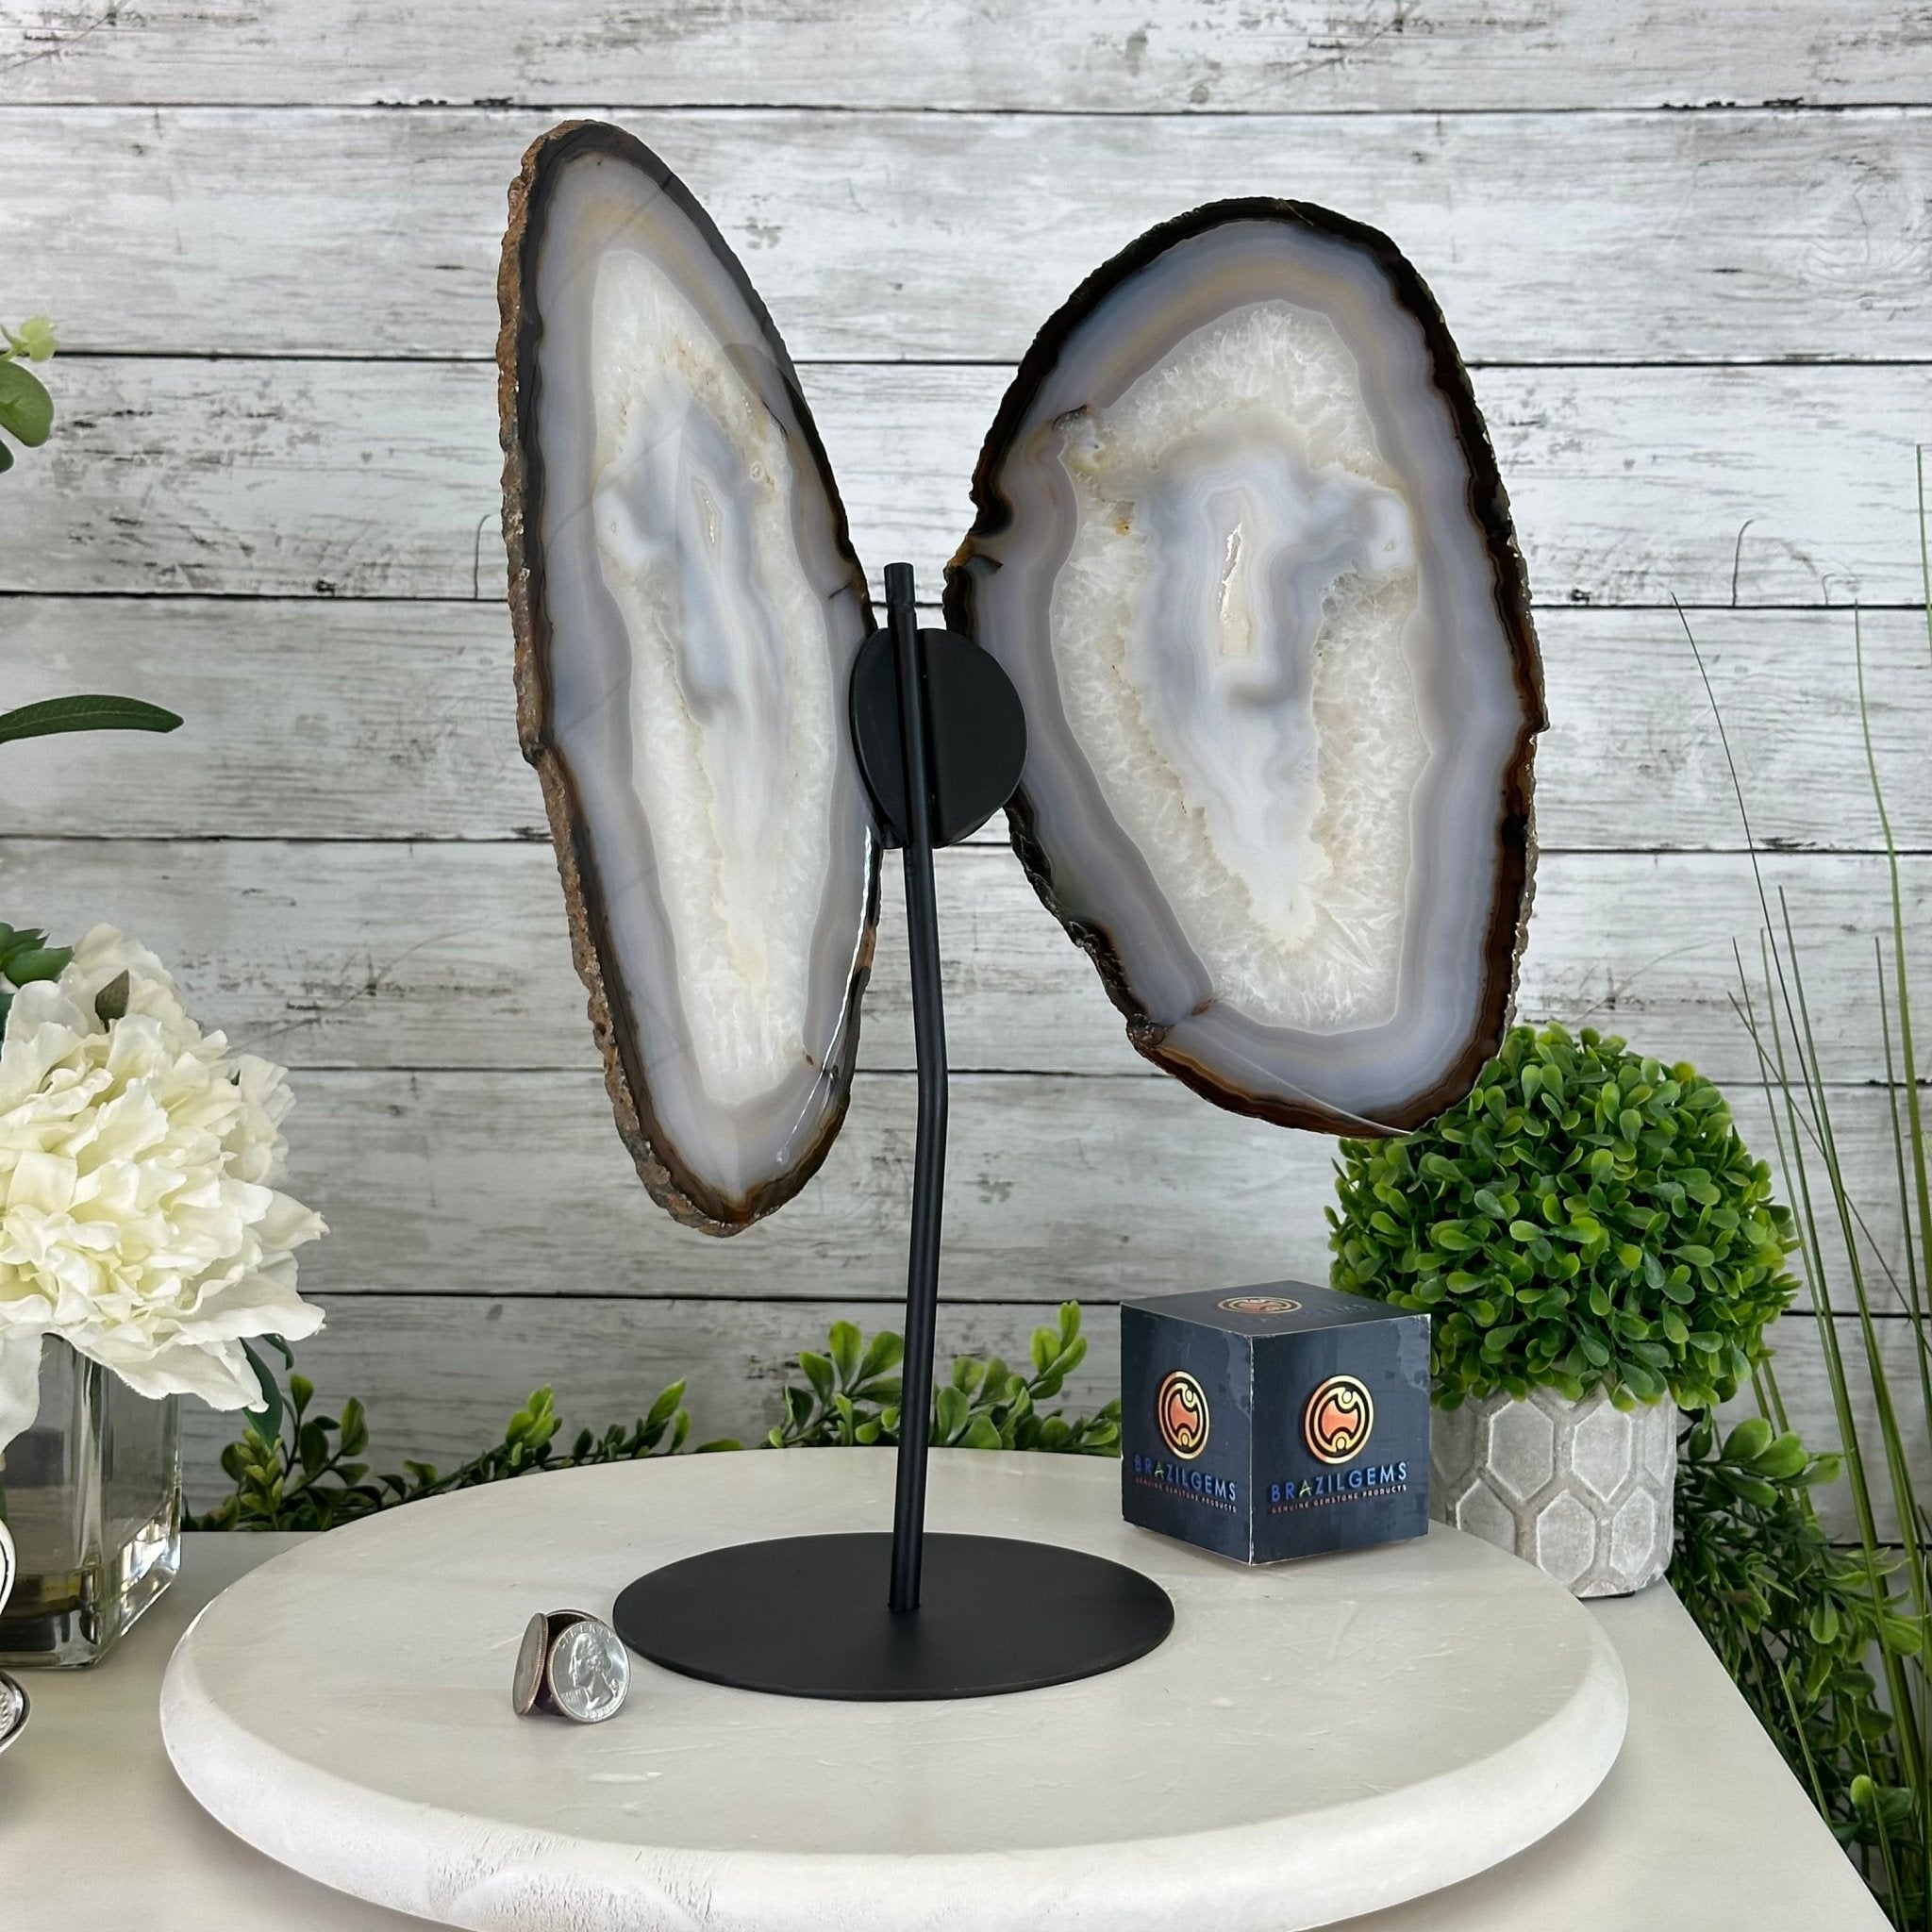 Natural Brazilian Agate "Butterfly Wings", 15.4" Tall #5050NA-100 - Brazil GemsBrazil GemsNatural Brazilian Agate "Butterfly Wings", 15.4" Tall #5050NA-100Agate Butterfly Wings5050NA-100